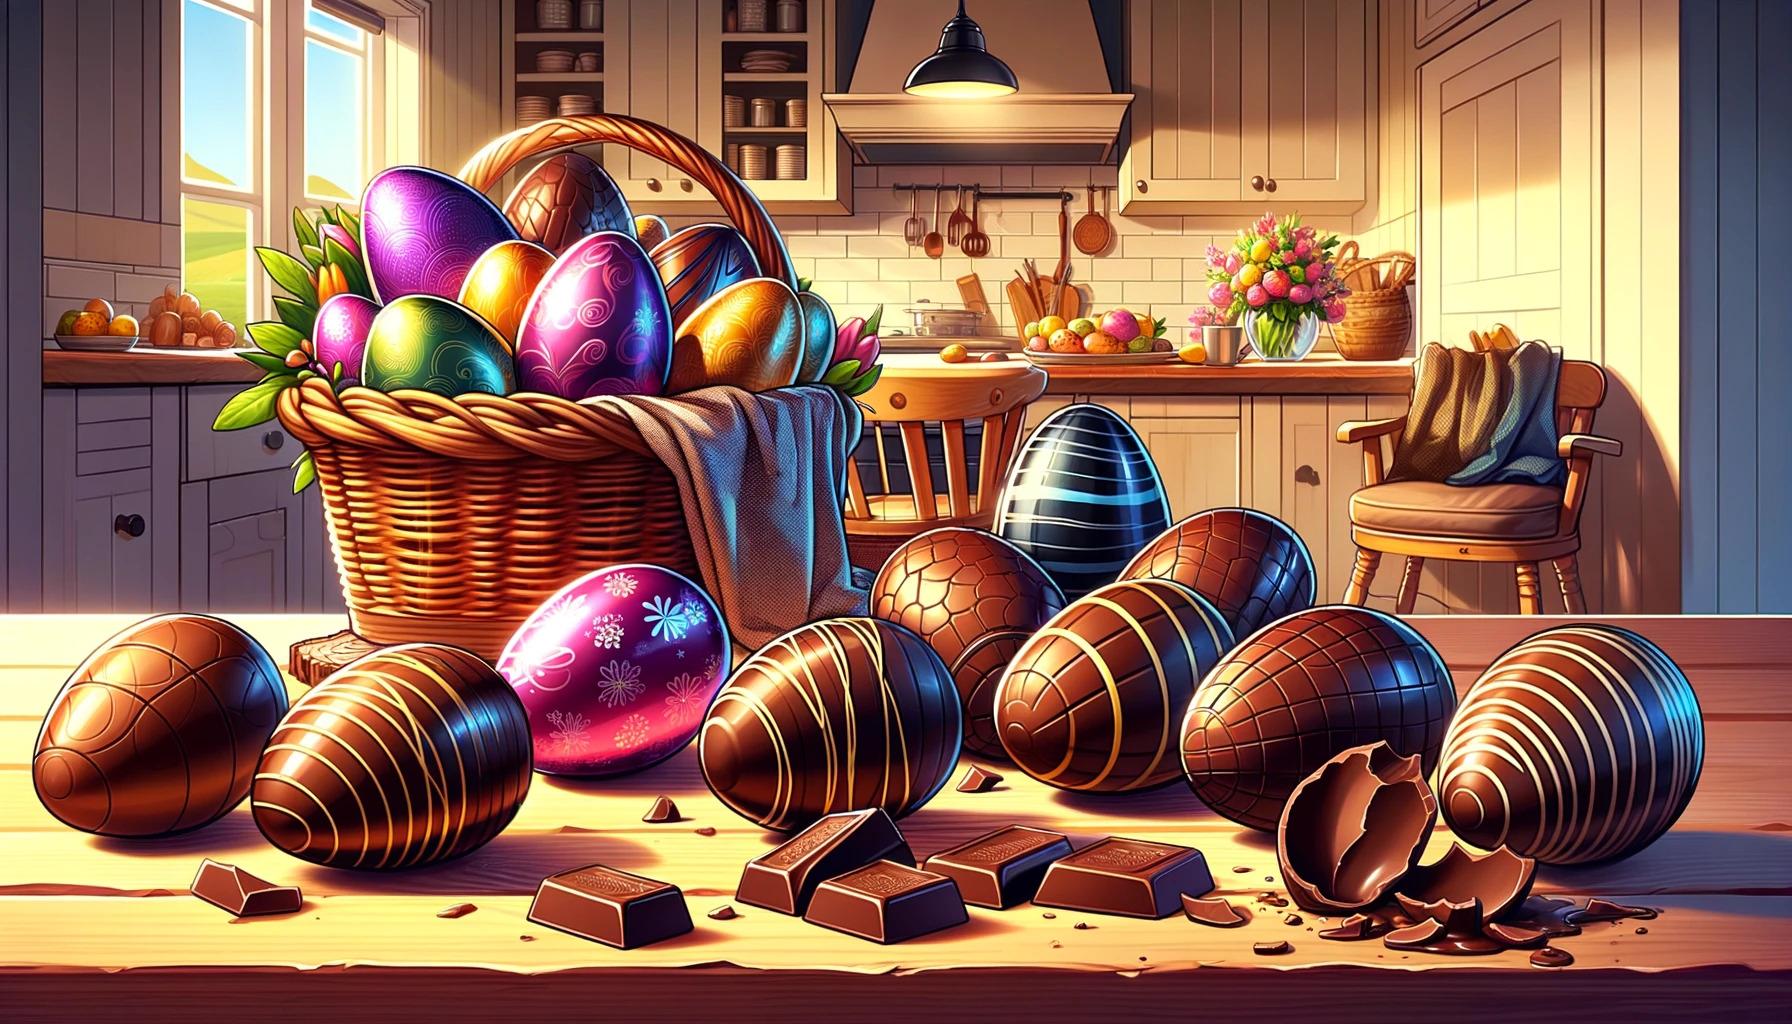  A cartoon-style illustration showcasing an assortment of luxurious chocolate Easter eggs, beautifully wrapped in shiny, colorful foil. The eggs are placed against a backdrop of a cozy, warm kitchen with a basket filled with more chocolate eggs and a few unwrapped ones revealing their rich, dark chocolate interior. 